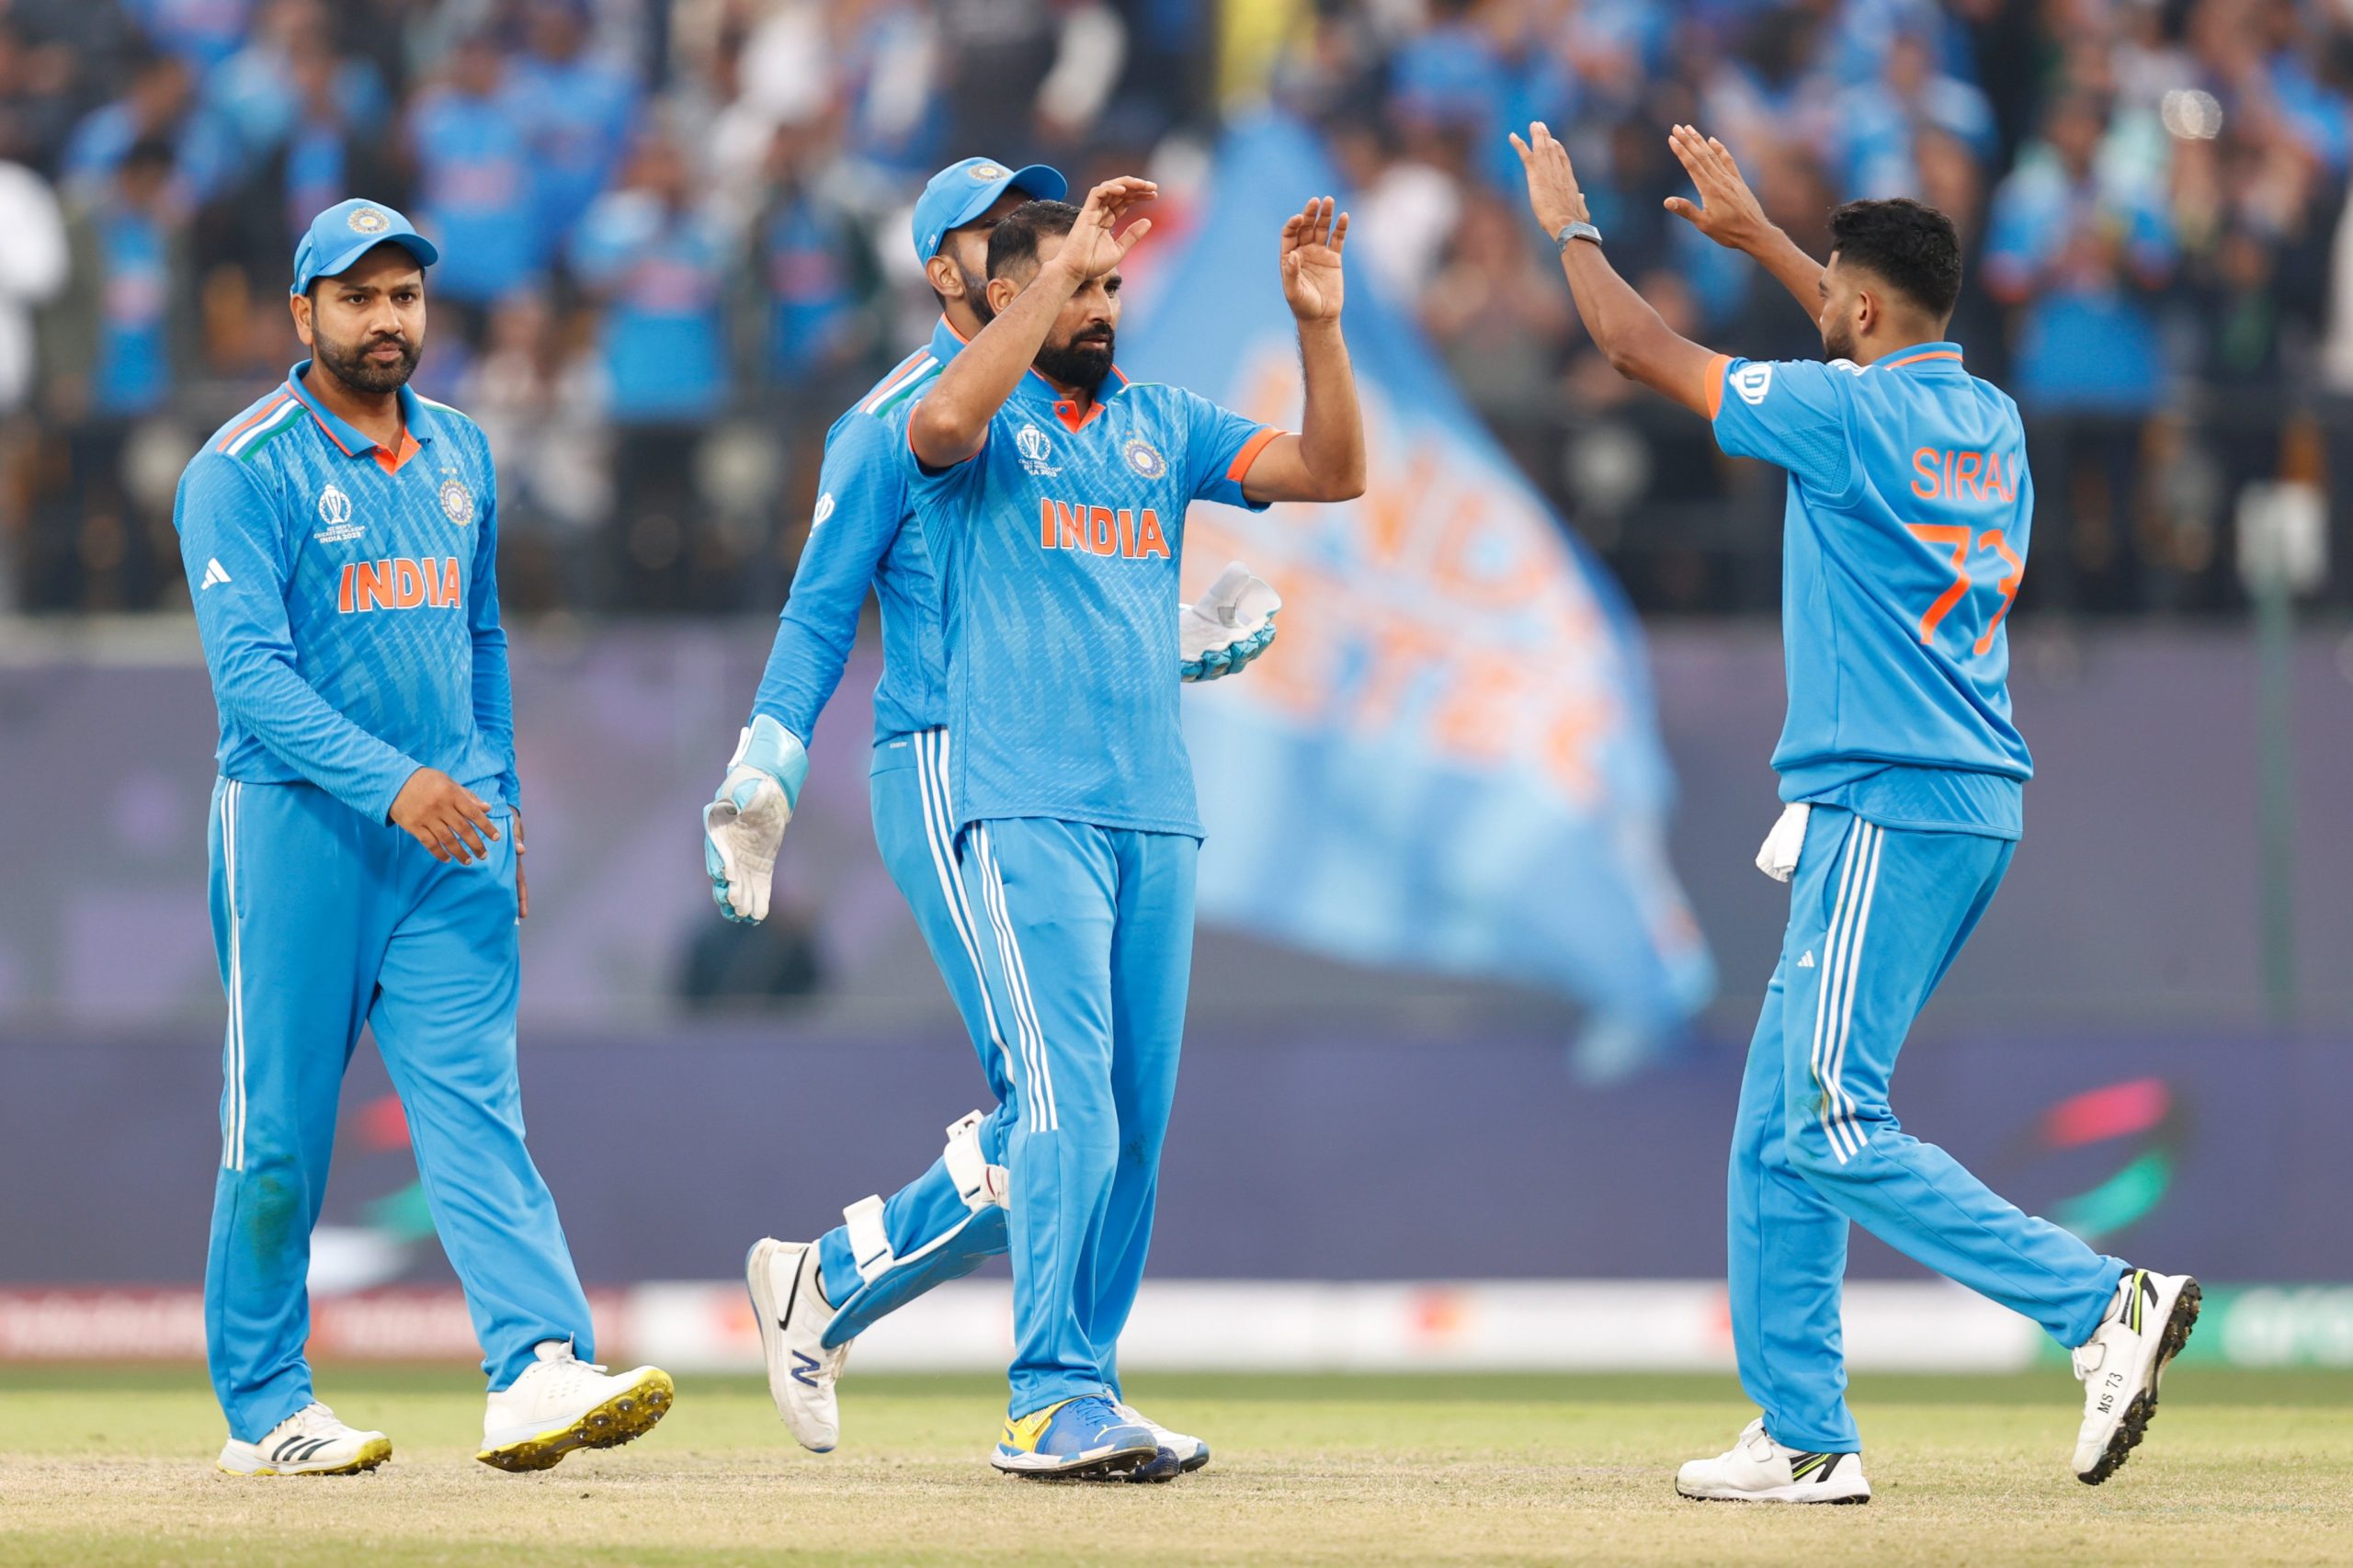 ICC Cricket World Cup 2023: What Should India Do To Restrict New Zealand In The Semi Final?